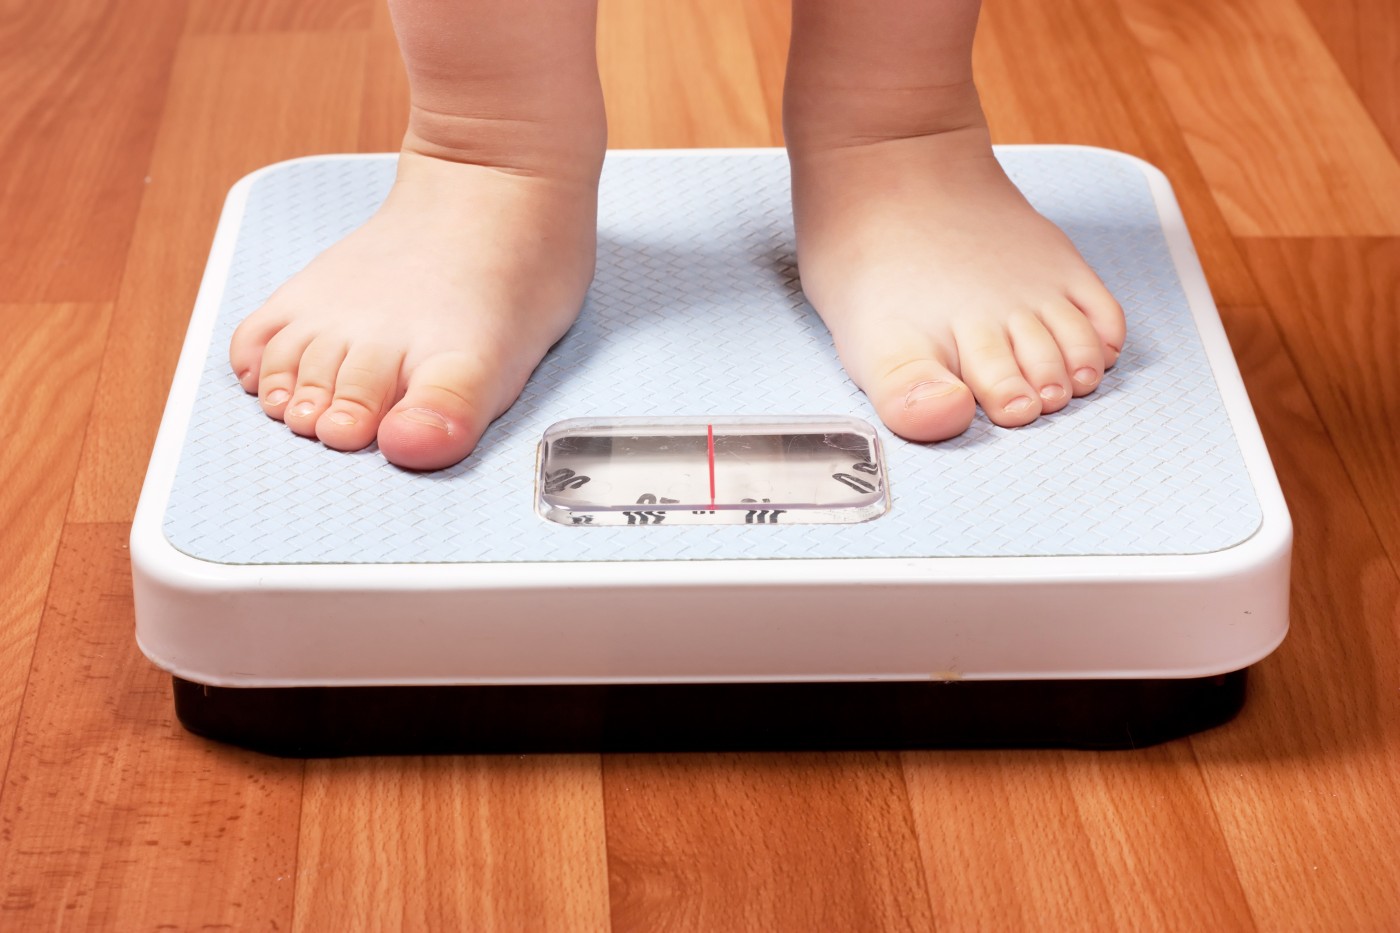 Most Physicians and Trainees Fail to Identify and Address Overweight and Obese Children, Study Shows